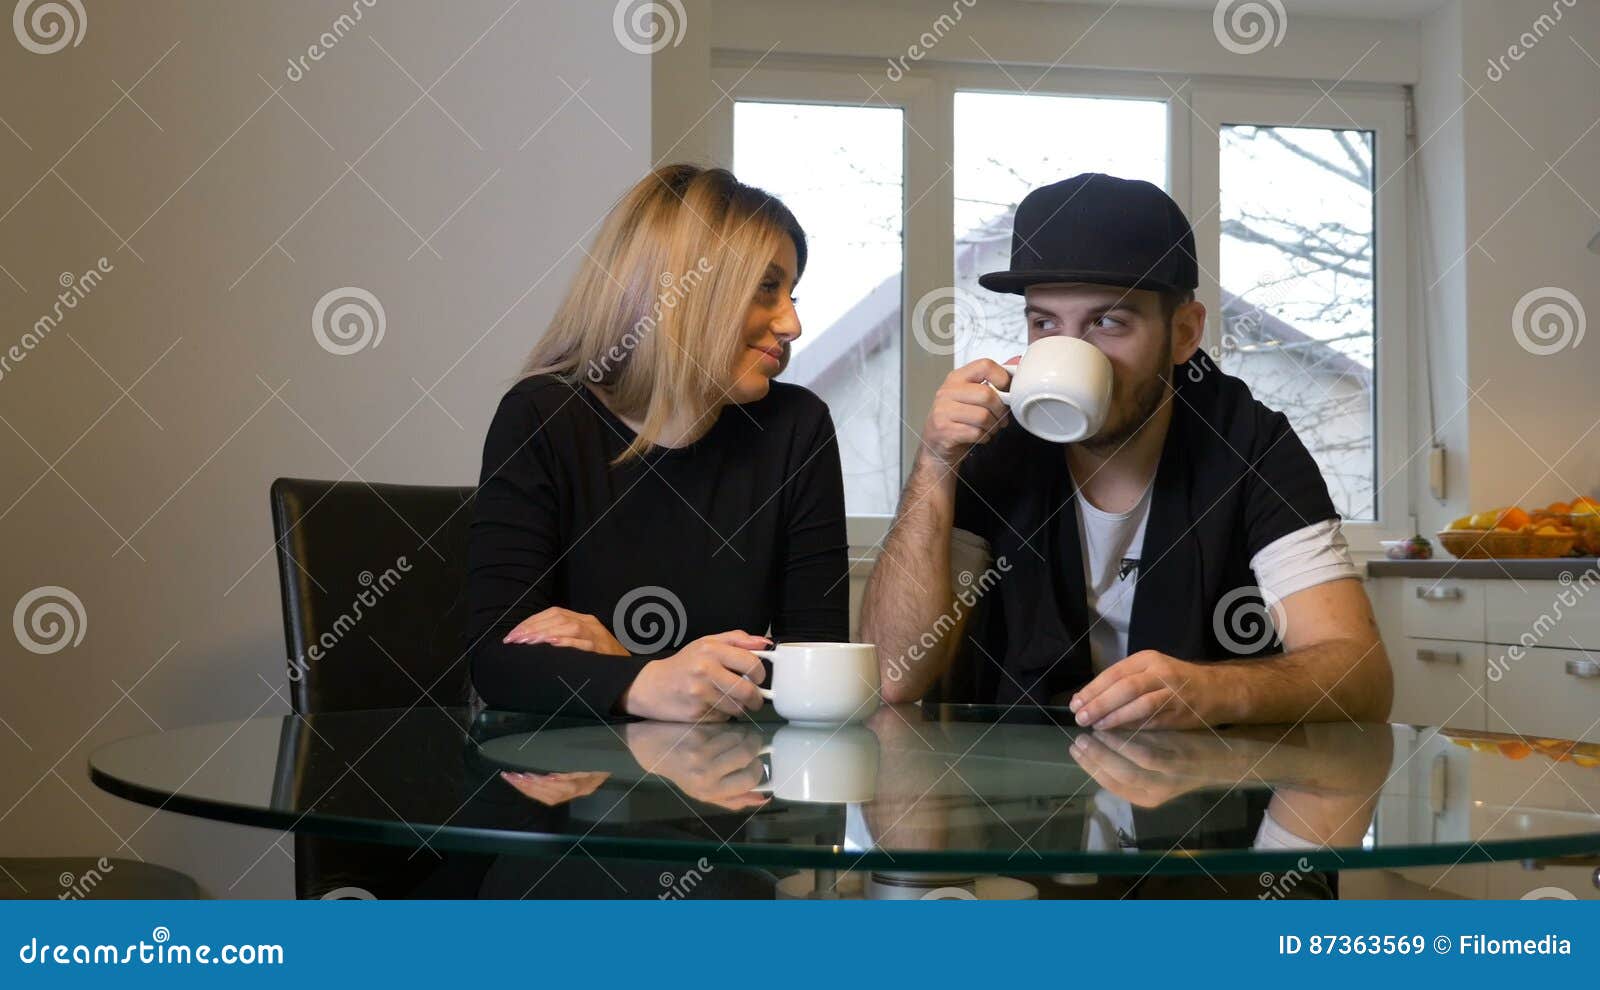 Cofi drinking coffee and playing with her husband